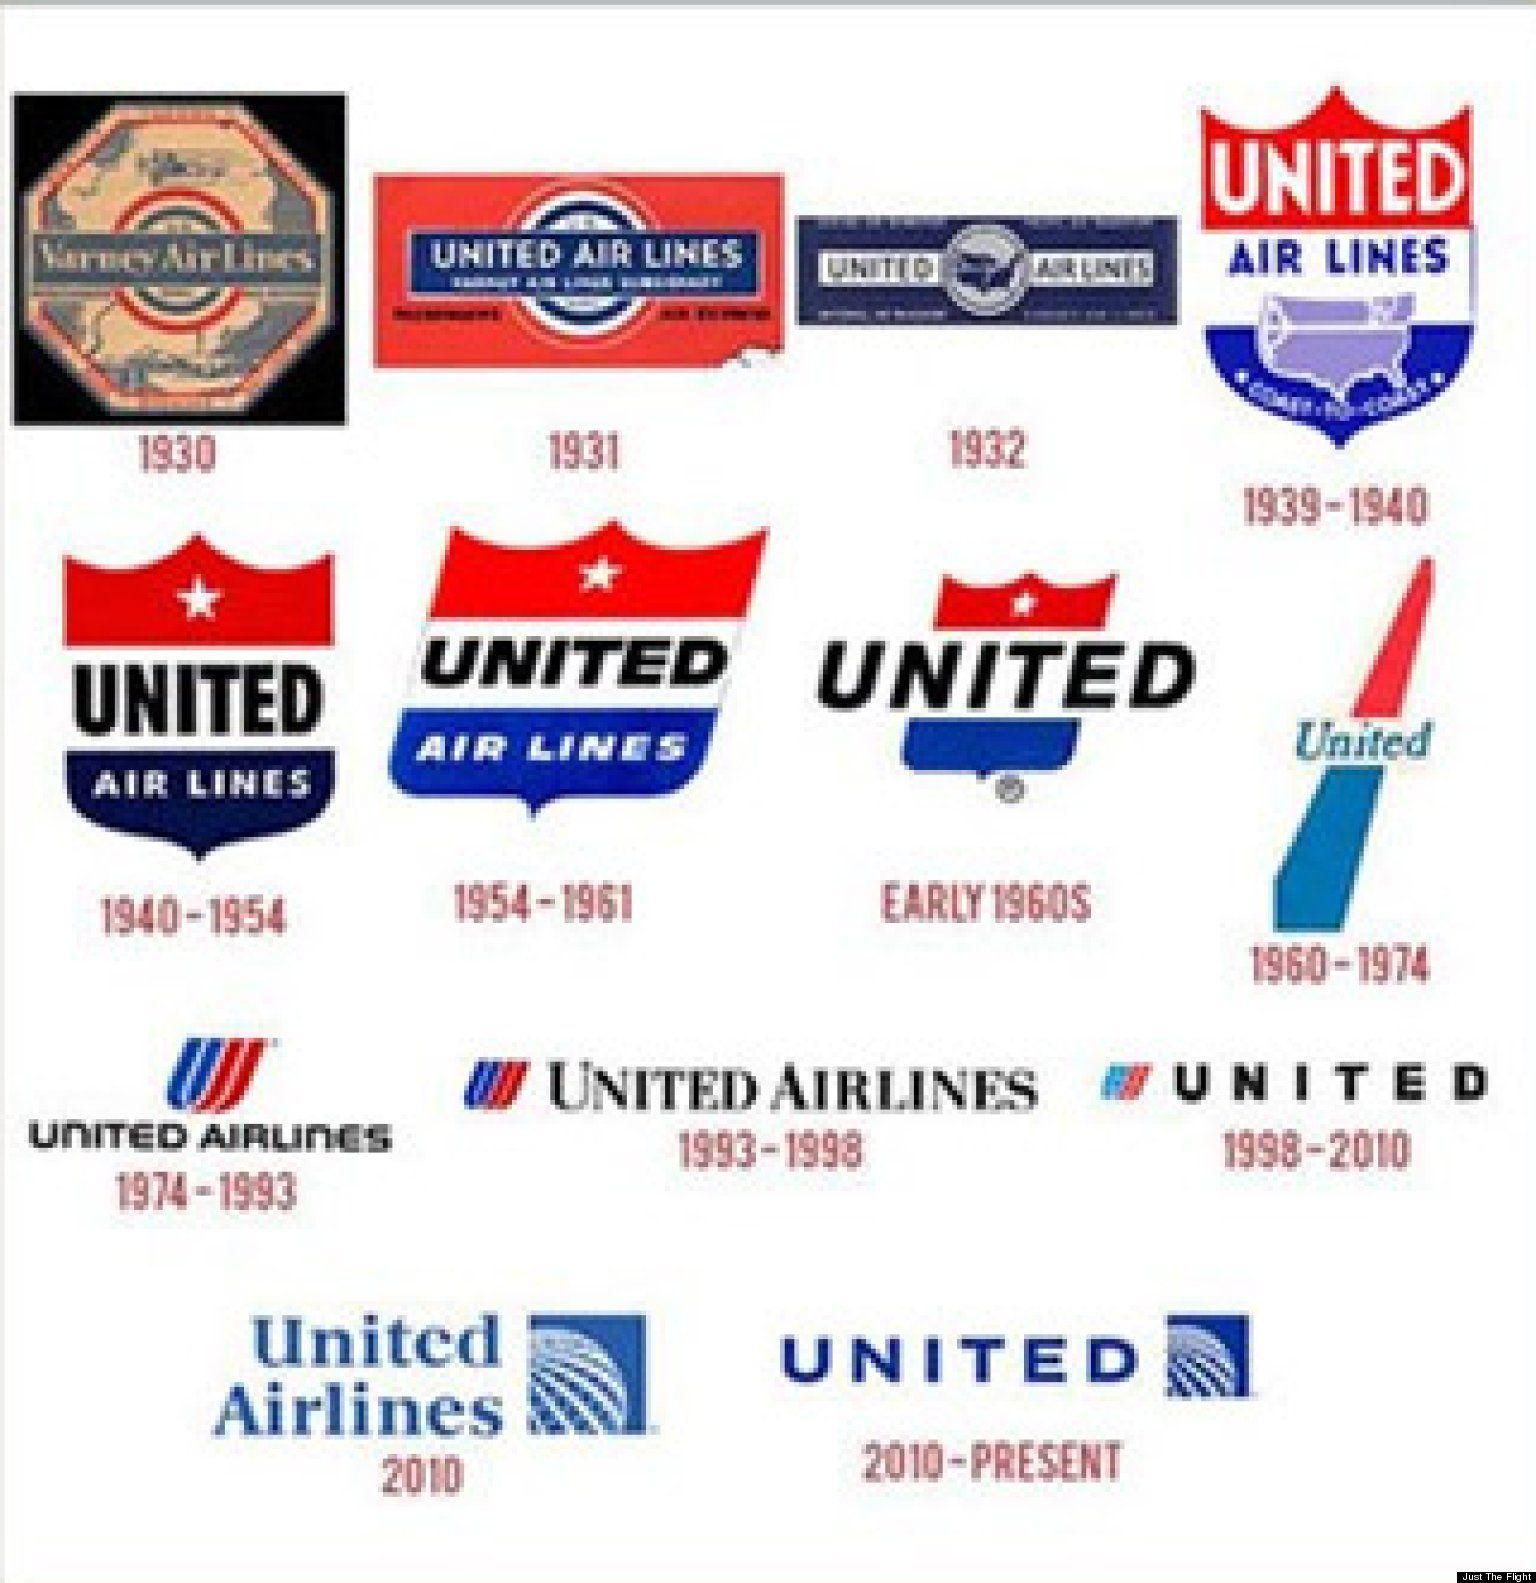 United Old Logo - airline logos and names.wagenaardentistry.com